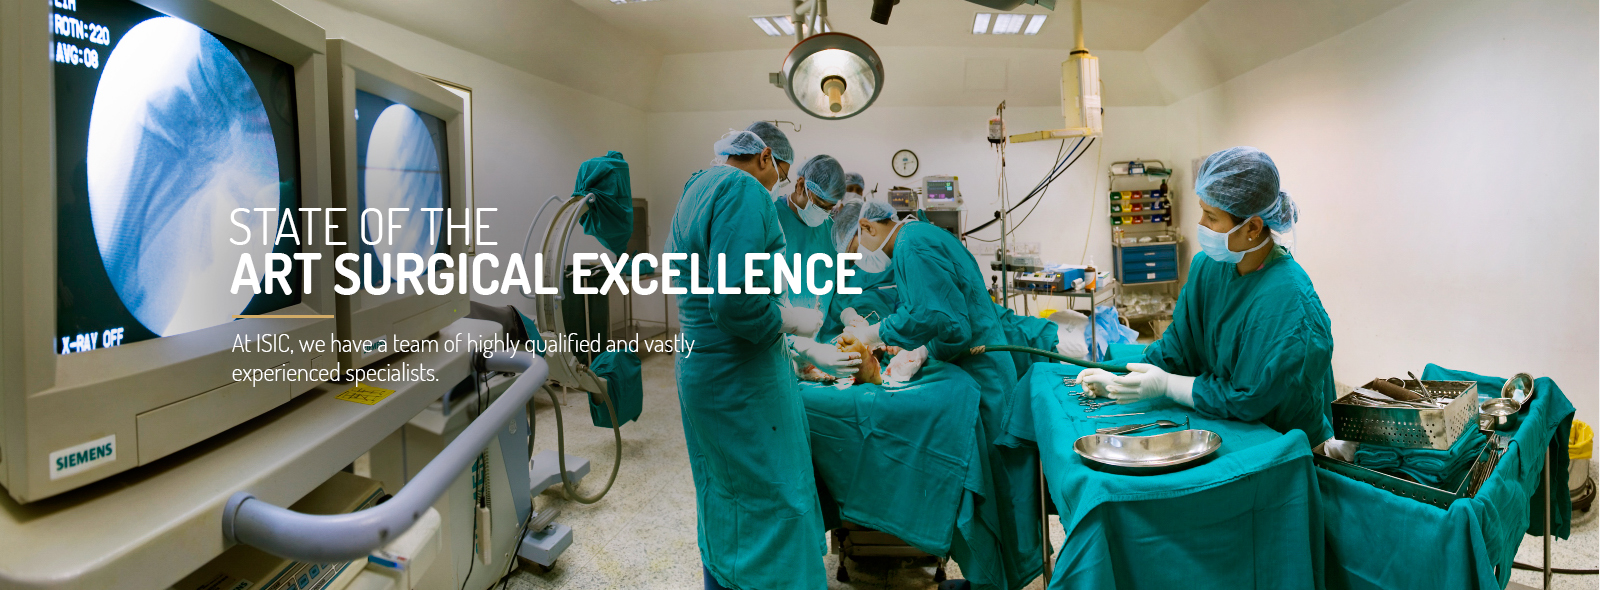 Indian Spinal Injuries Centre | Top Super Speciality Spinal Hospitals in India